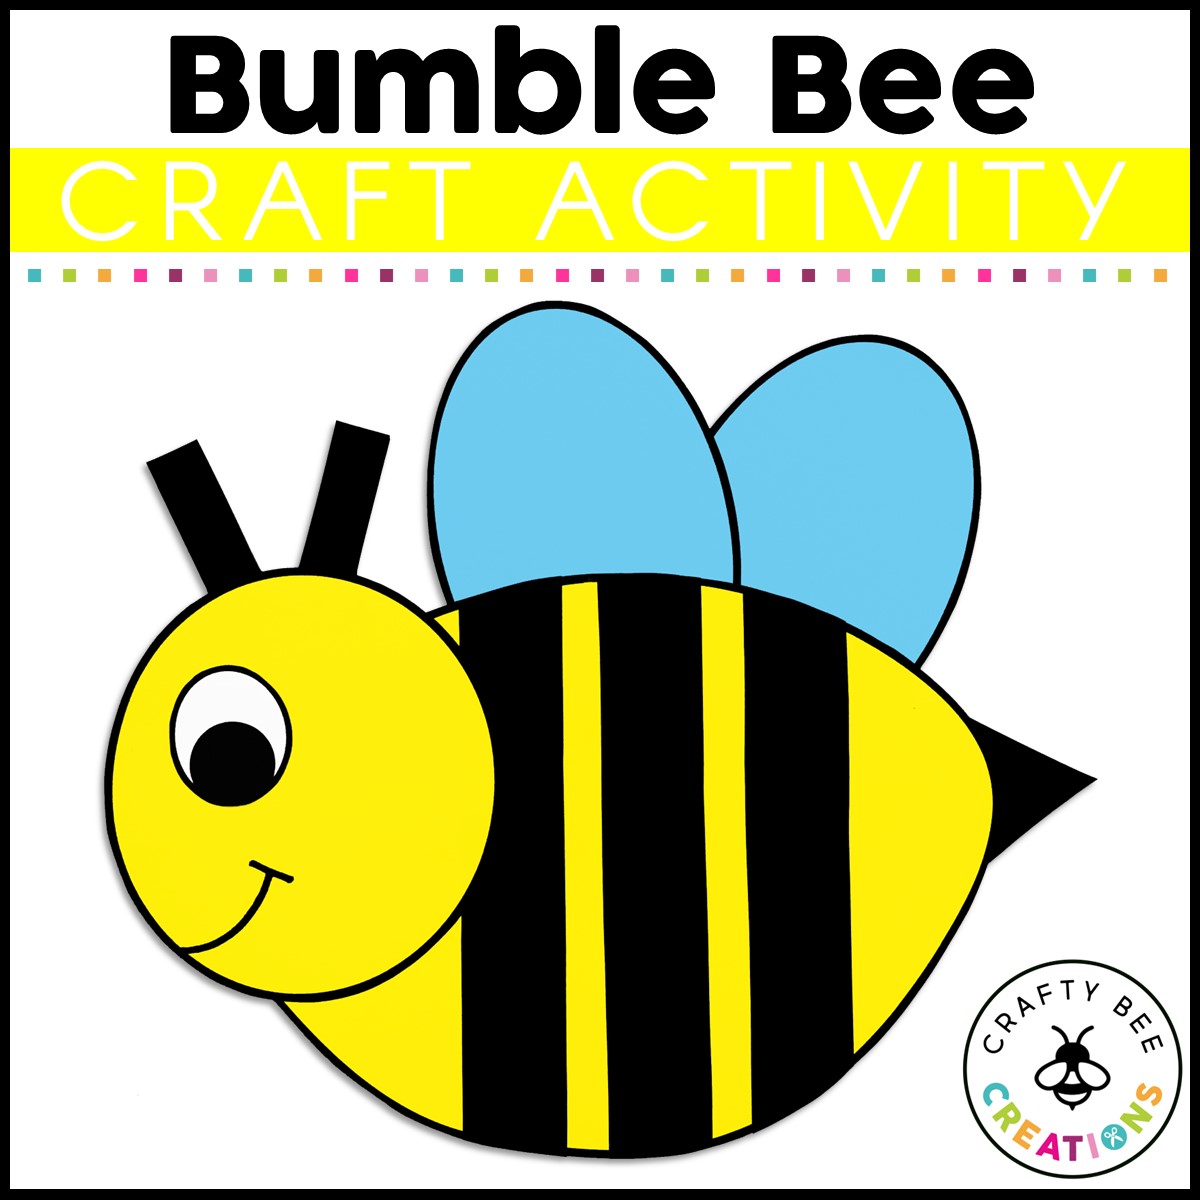 Bumble Bee Craft Activity - Crafty Bee Creations